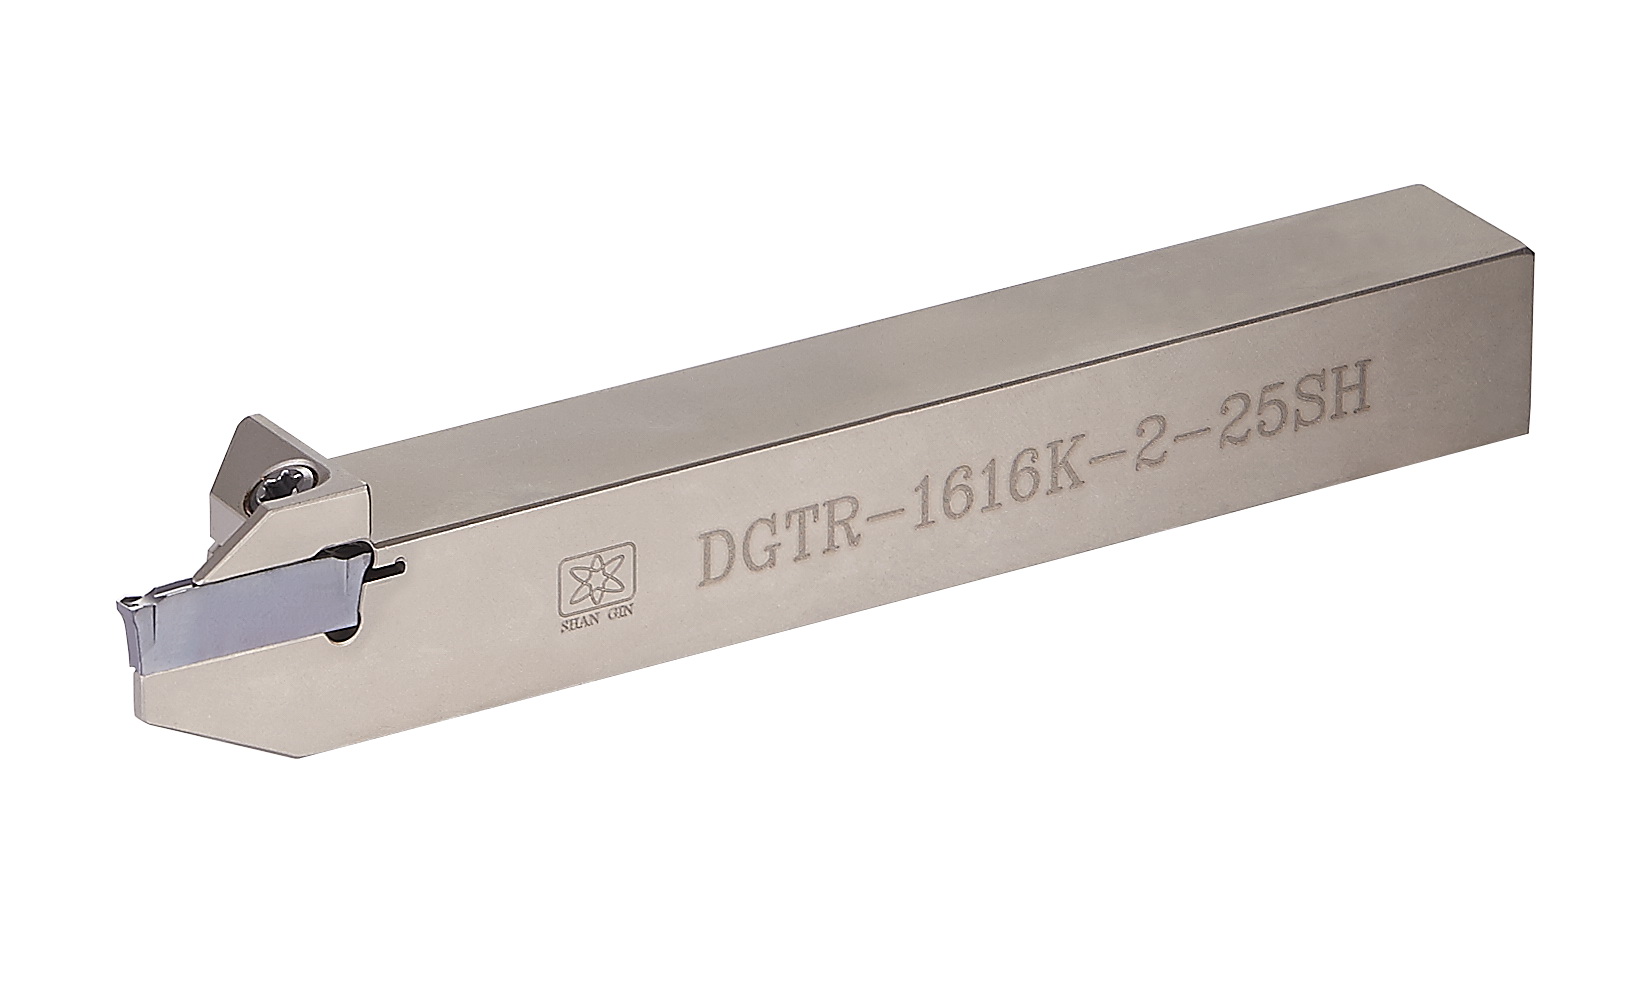 Products|DGTR (DGN2002) External Grooving Tool